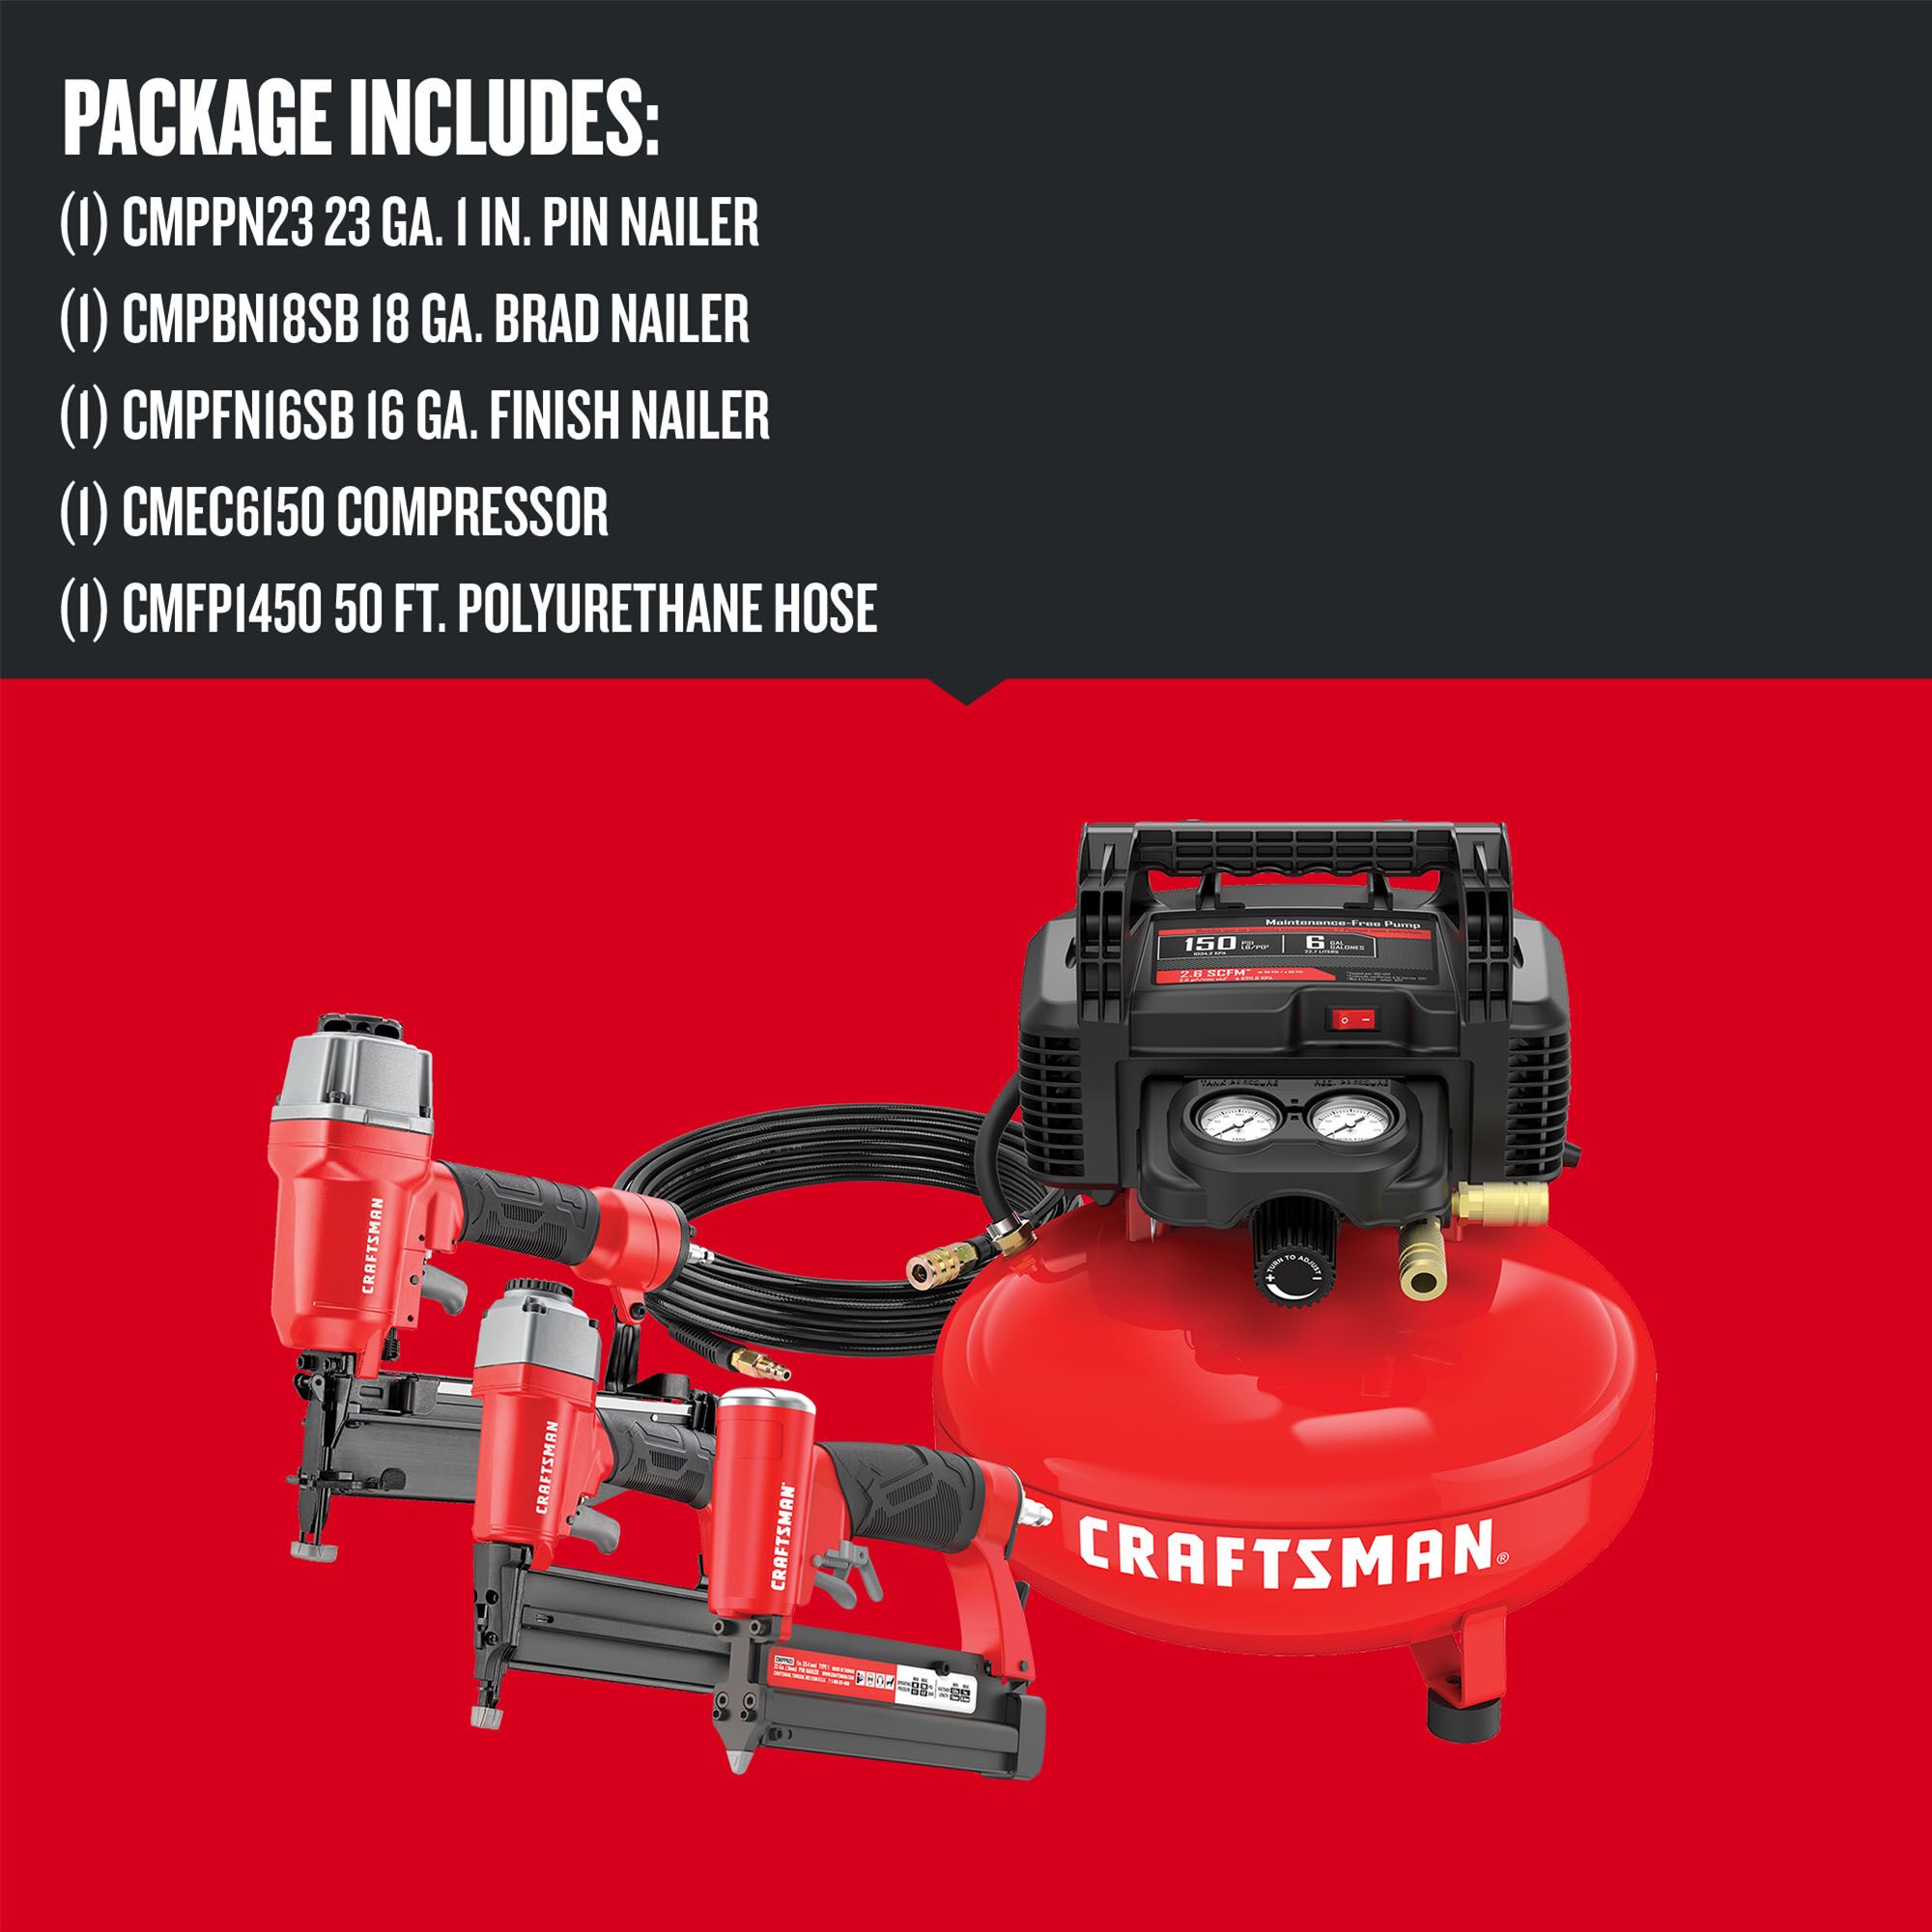 Graphic of CRAFTSMAN Combo Kits: Power Tools highlighting product features